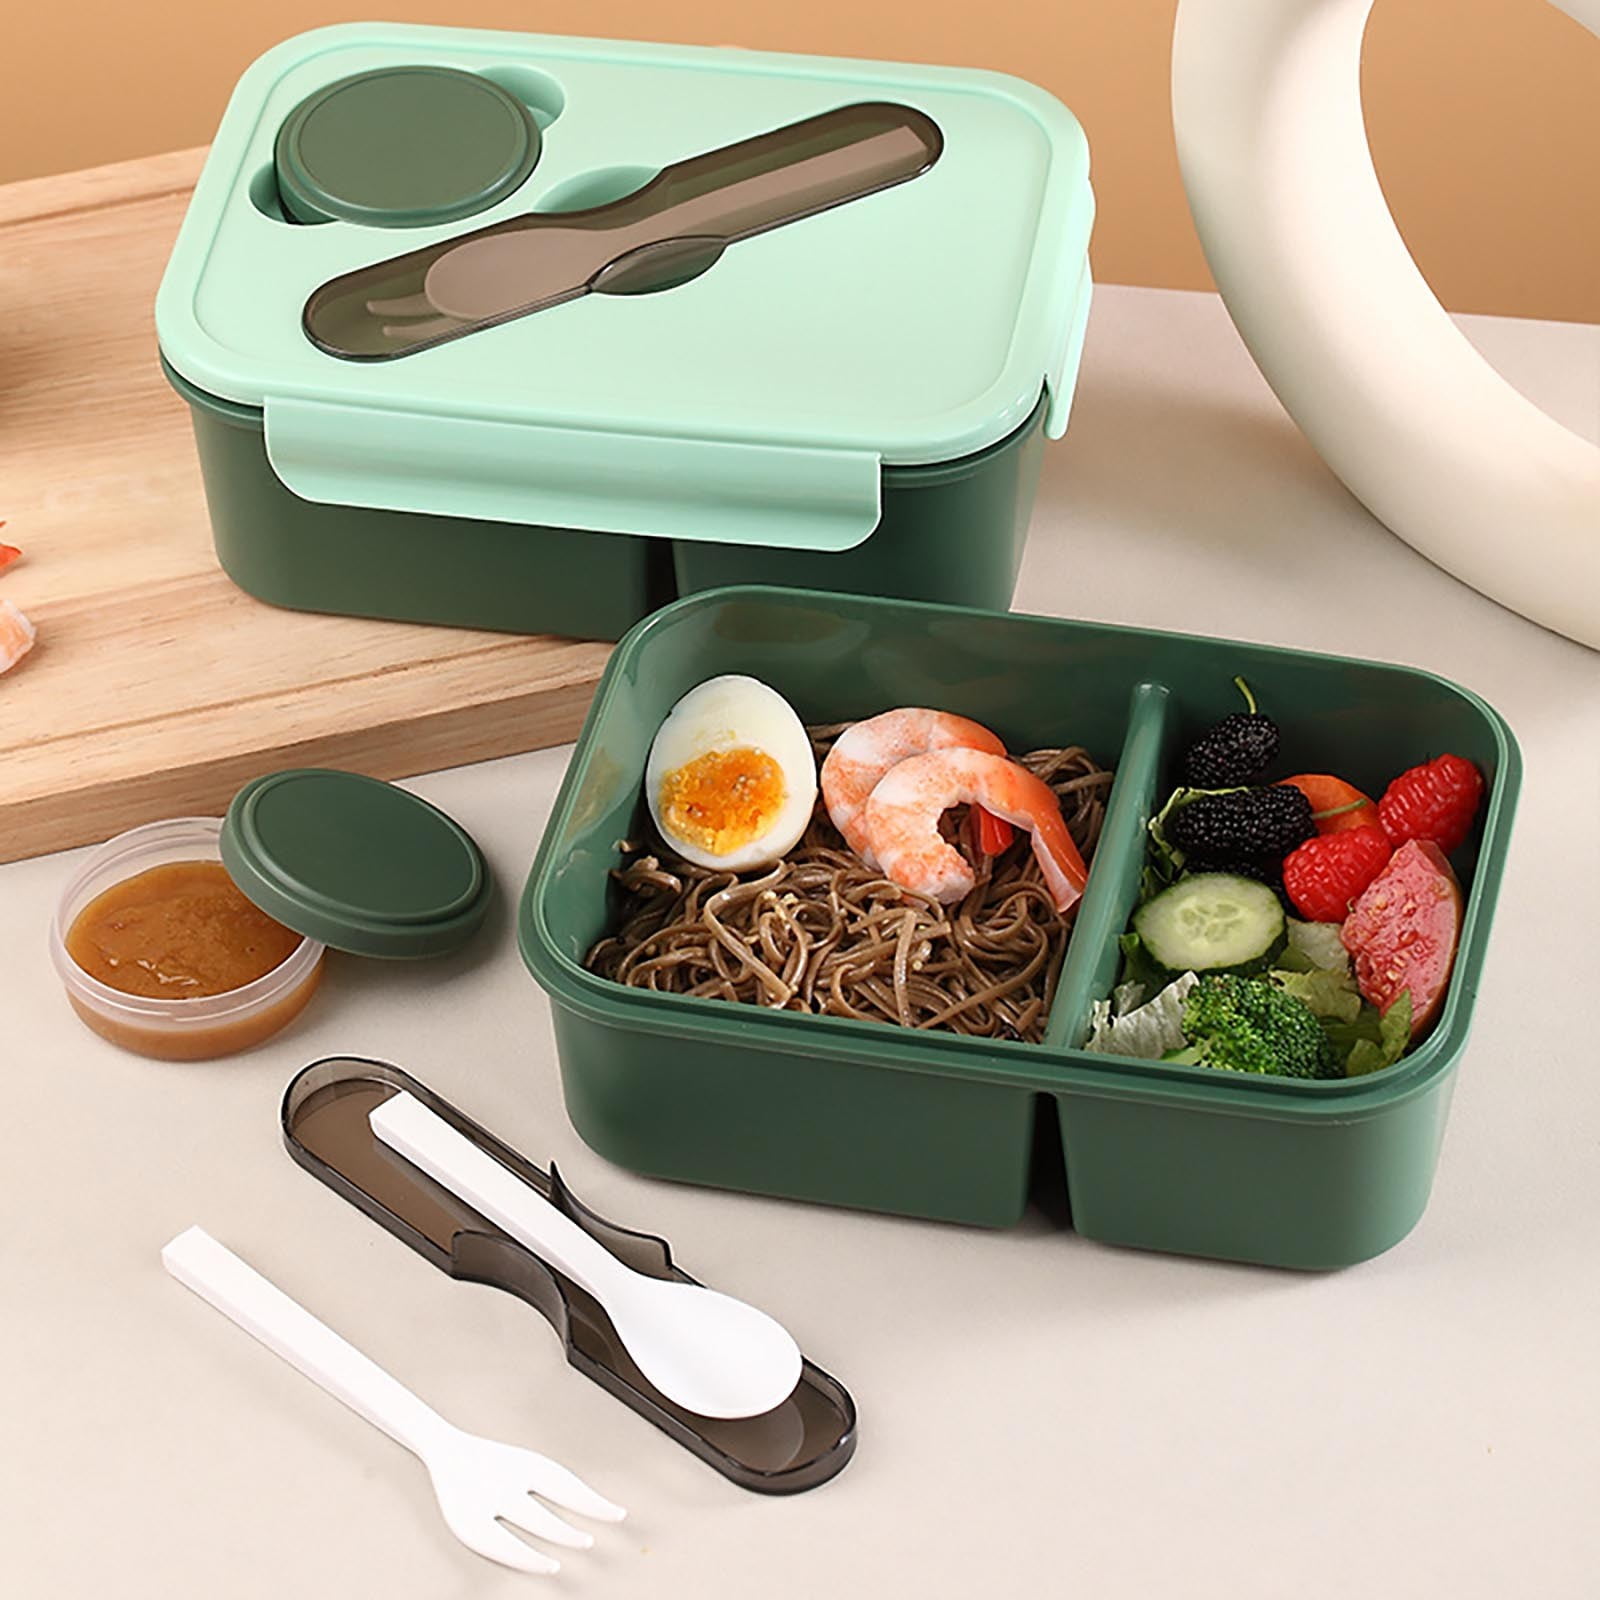 A Lunch Box That Keeps Food Warm – Biome US